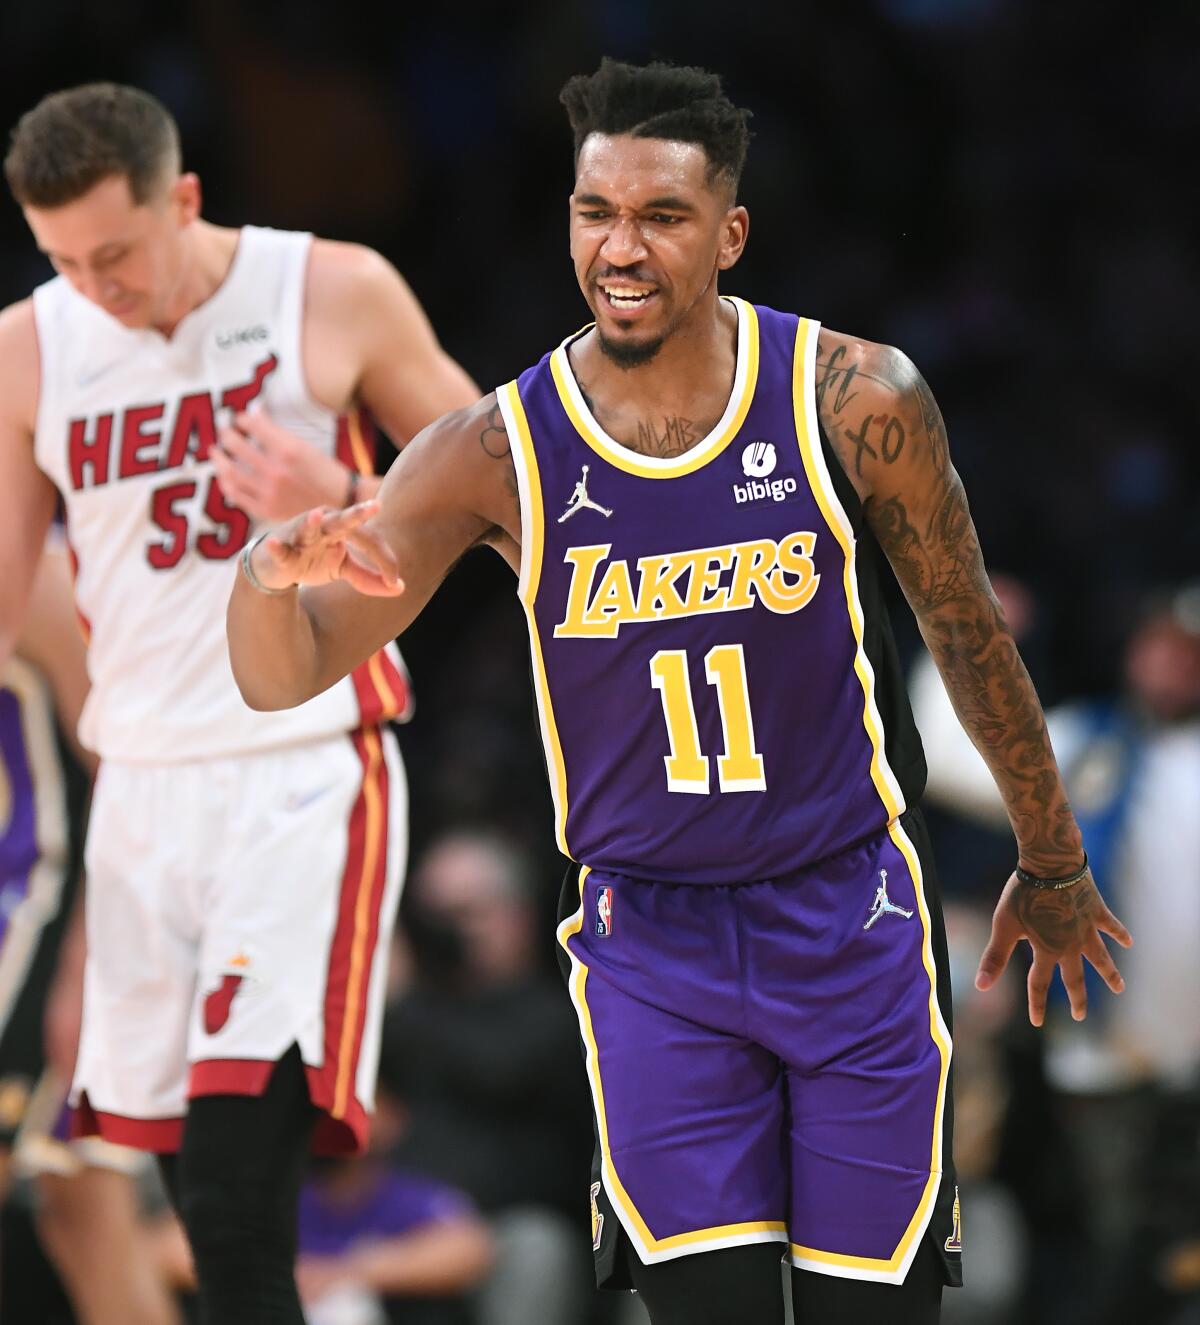 The Lakers' Malik Monk smiles during a game.